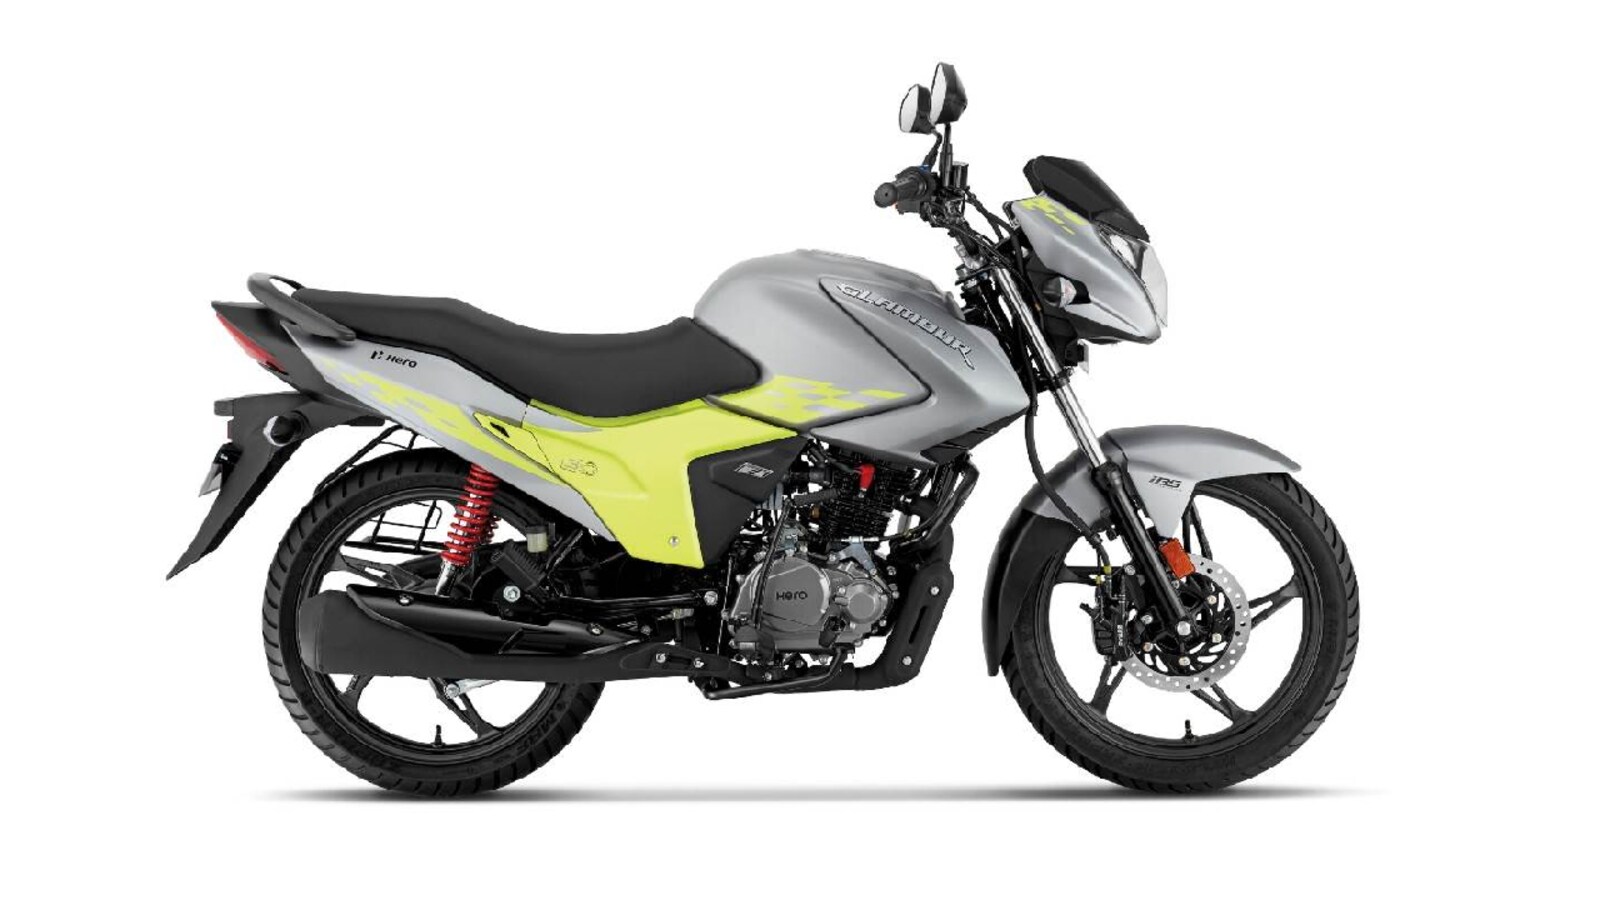 Hero Glamour 125 Blaze special edition launched at Rs 72,000